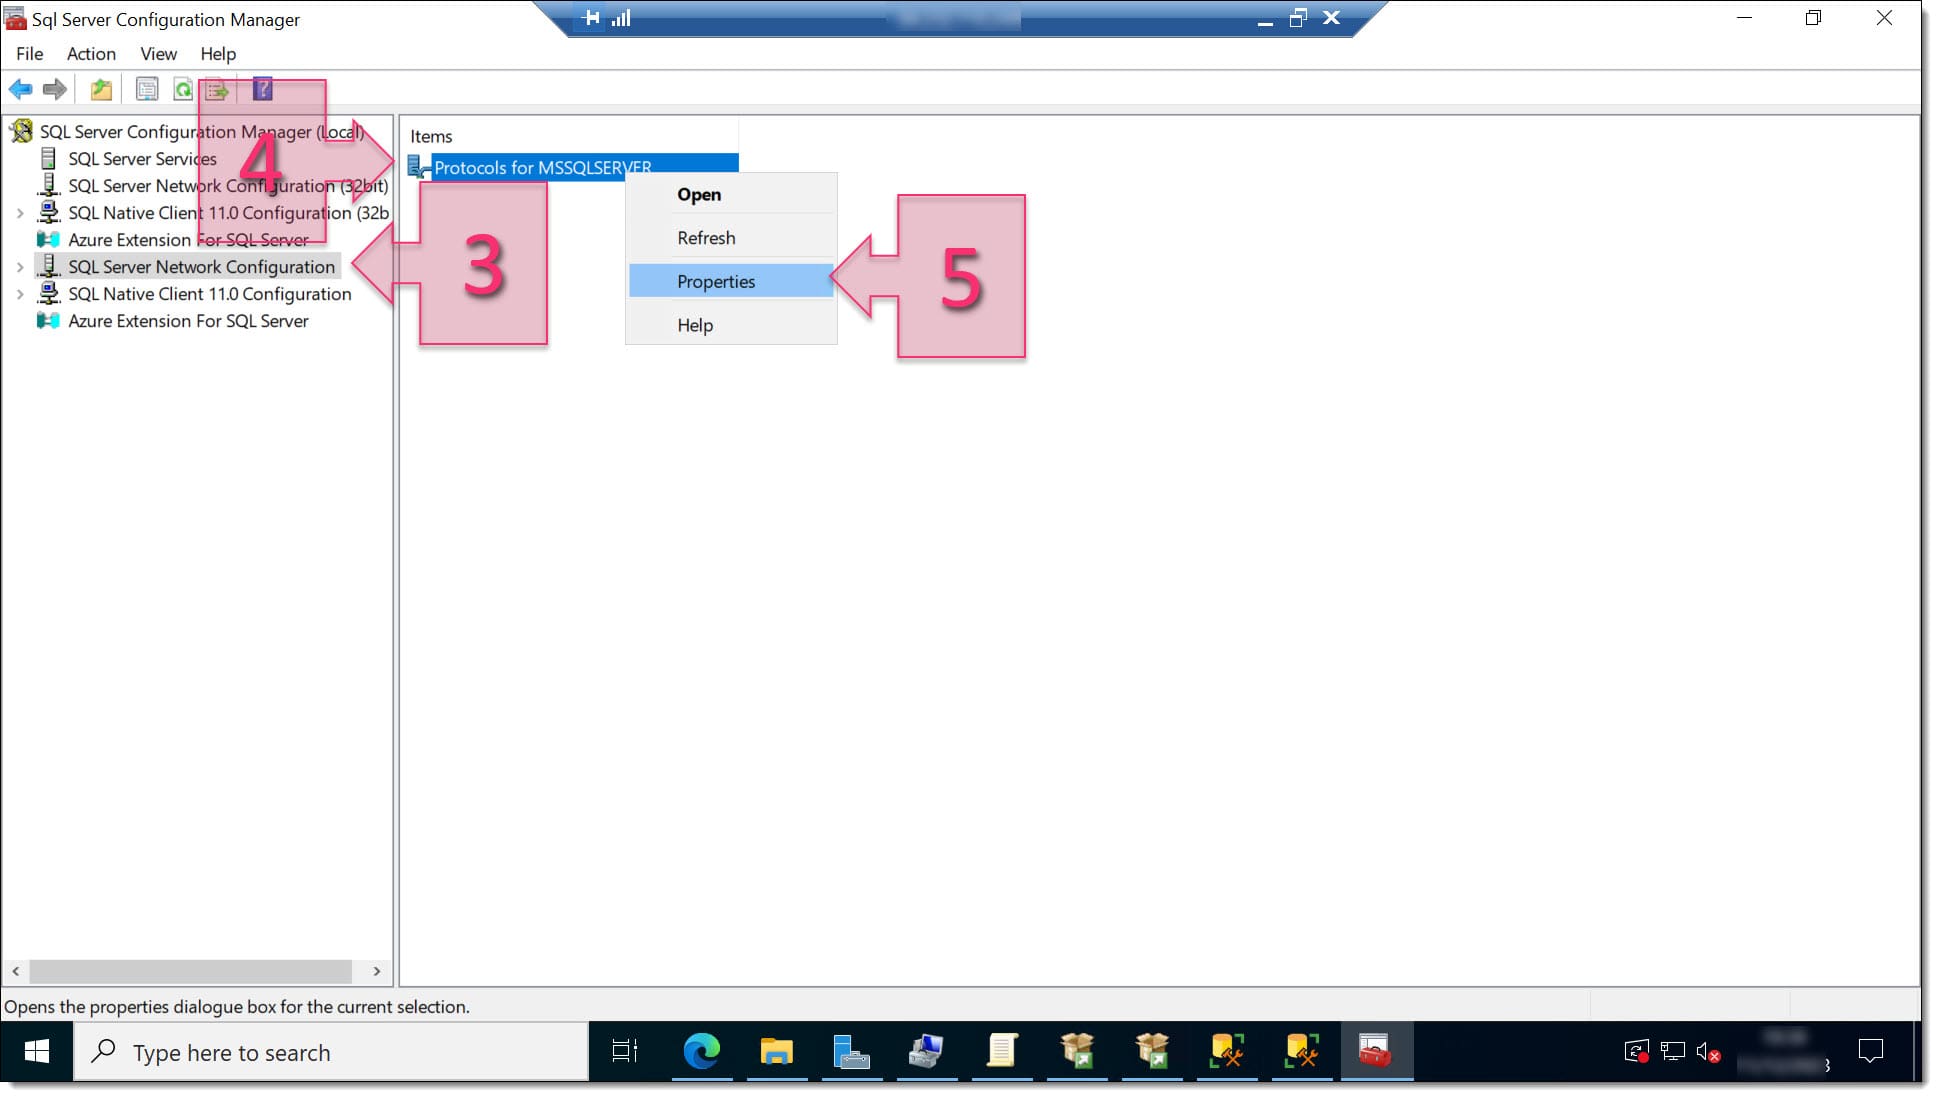 A screenshot of the SQL Server Configuration Manager window